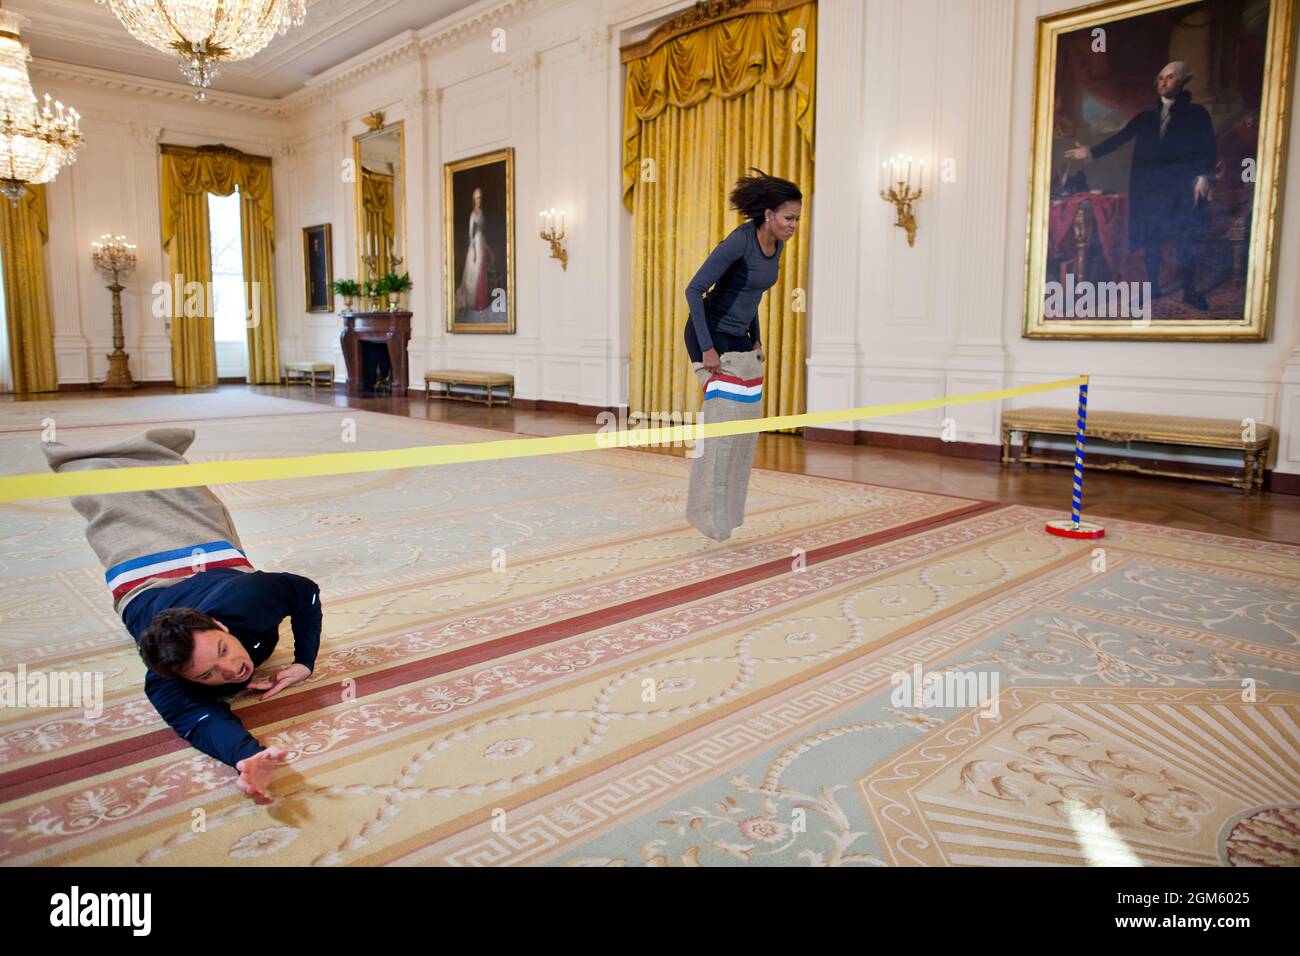 First Lady Michelle Obama participates in a potato sack race with Jimmy Fallon in the East Room of the White House during a “Late Night with Jimmy Fallon” taping for the second anniversary of the 'Let’s Move!' initiative, Jan. 25, 2012. (Official White House Photo by Chuck Kennedy) This official White House photograph is being made available only for publication by news organizations and/or for personal use printing by the subject(s) of the photograph. The photograph may not be manipulated in any way and may not be used in commercial or political materials, advertisements, emails, products, pr Stock Photo